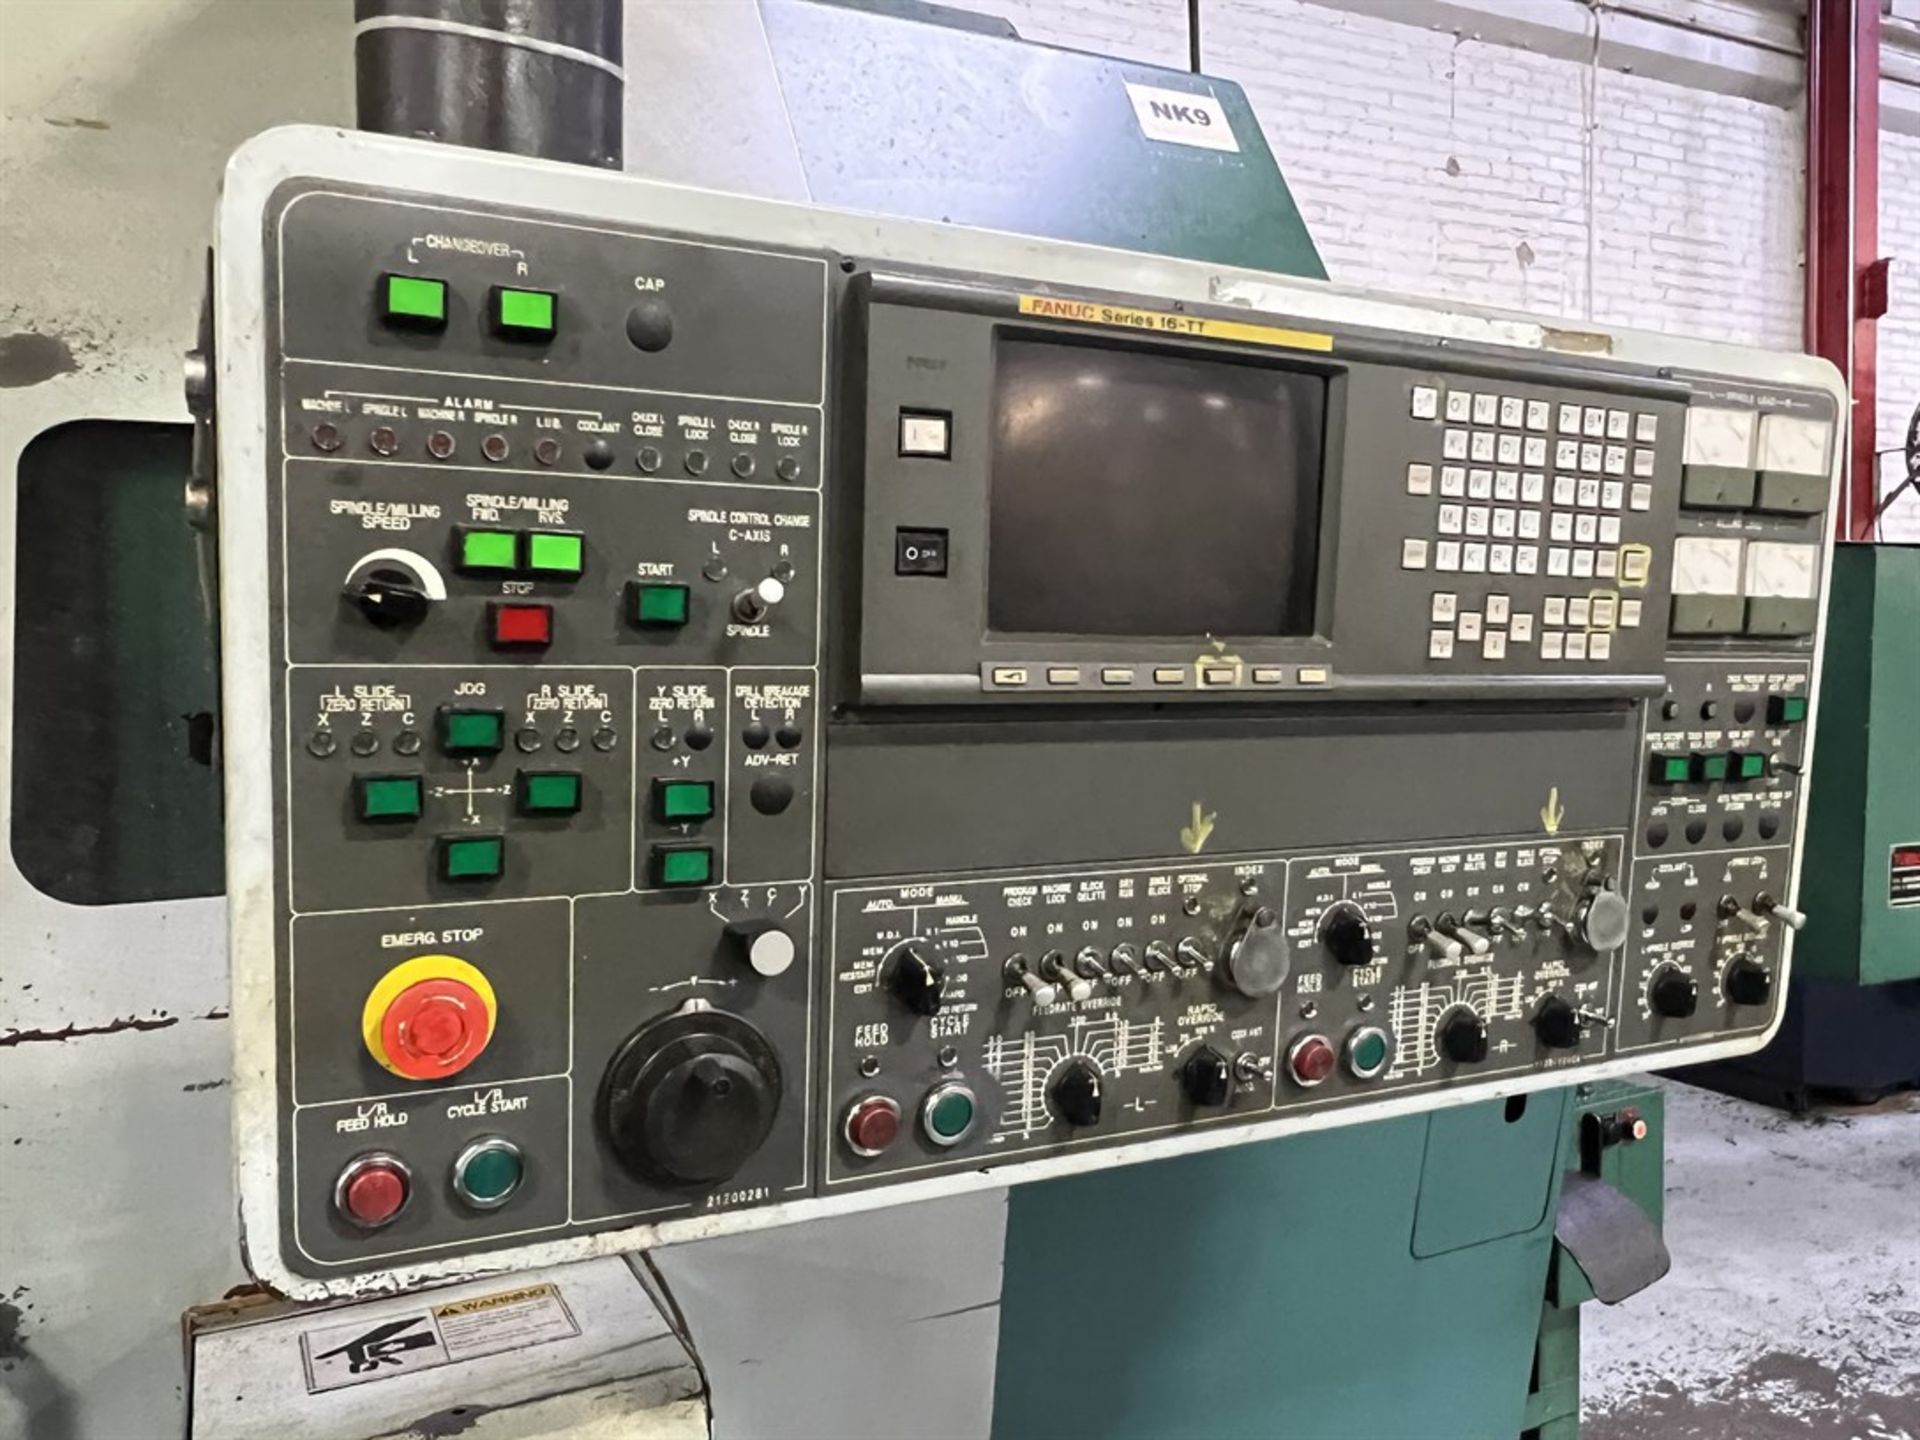 NAKAMURA-TOME TW-30 CNC Turning Center, s/n na, Fanuc 16-TT Controls, Twin 12-Position Turrets w/ - Image 9 of 13